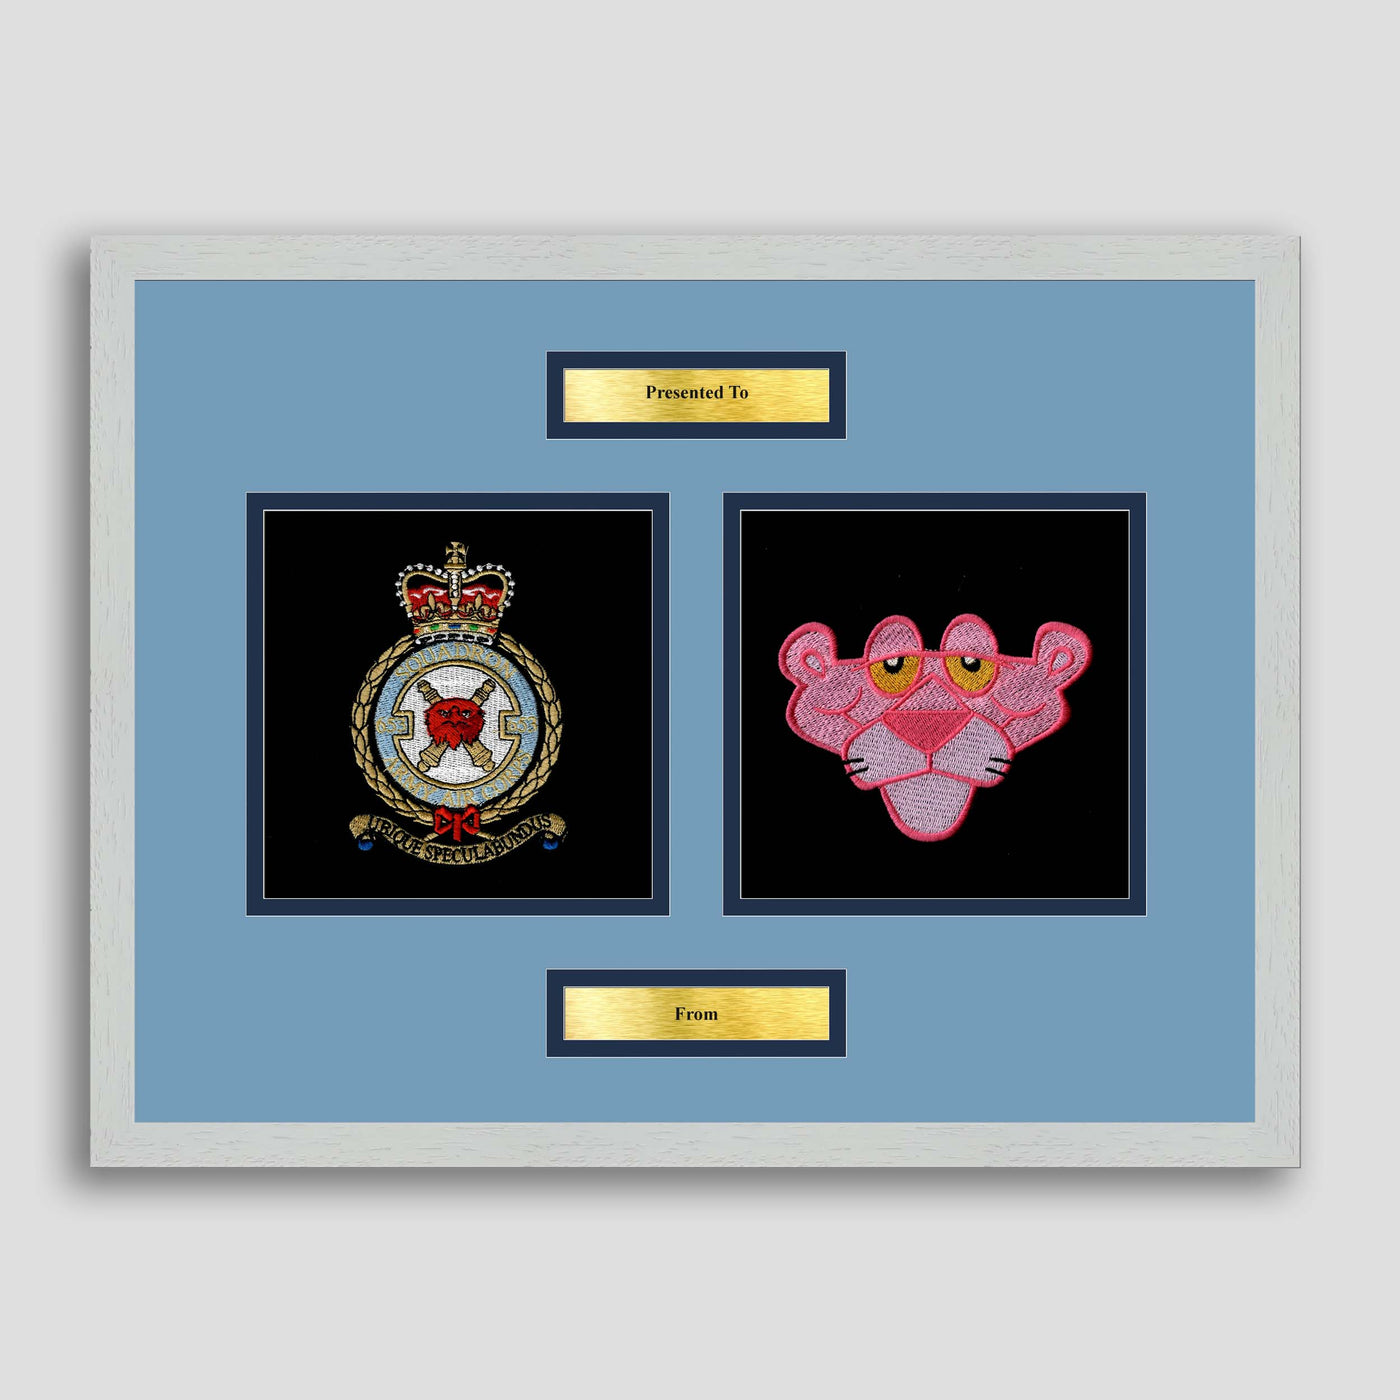 653 Sqn Army Air Corps & The Pink Panther Framed Military Embroidery Presentation